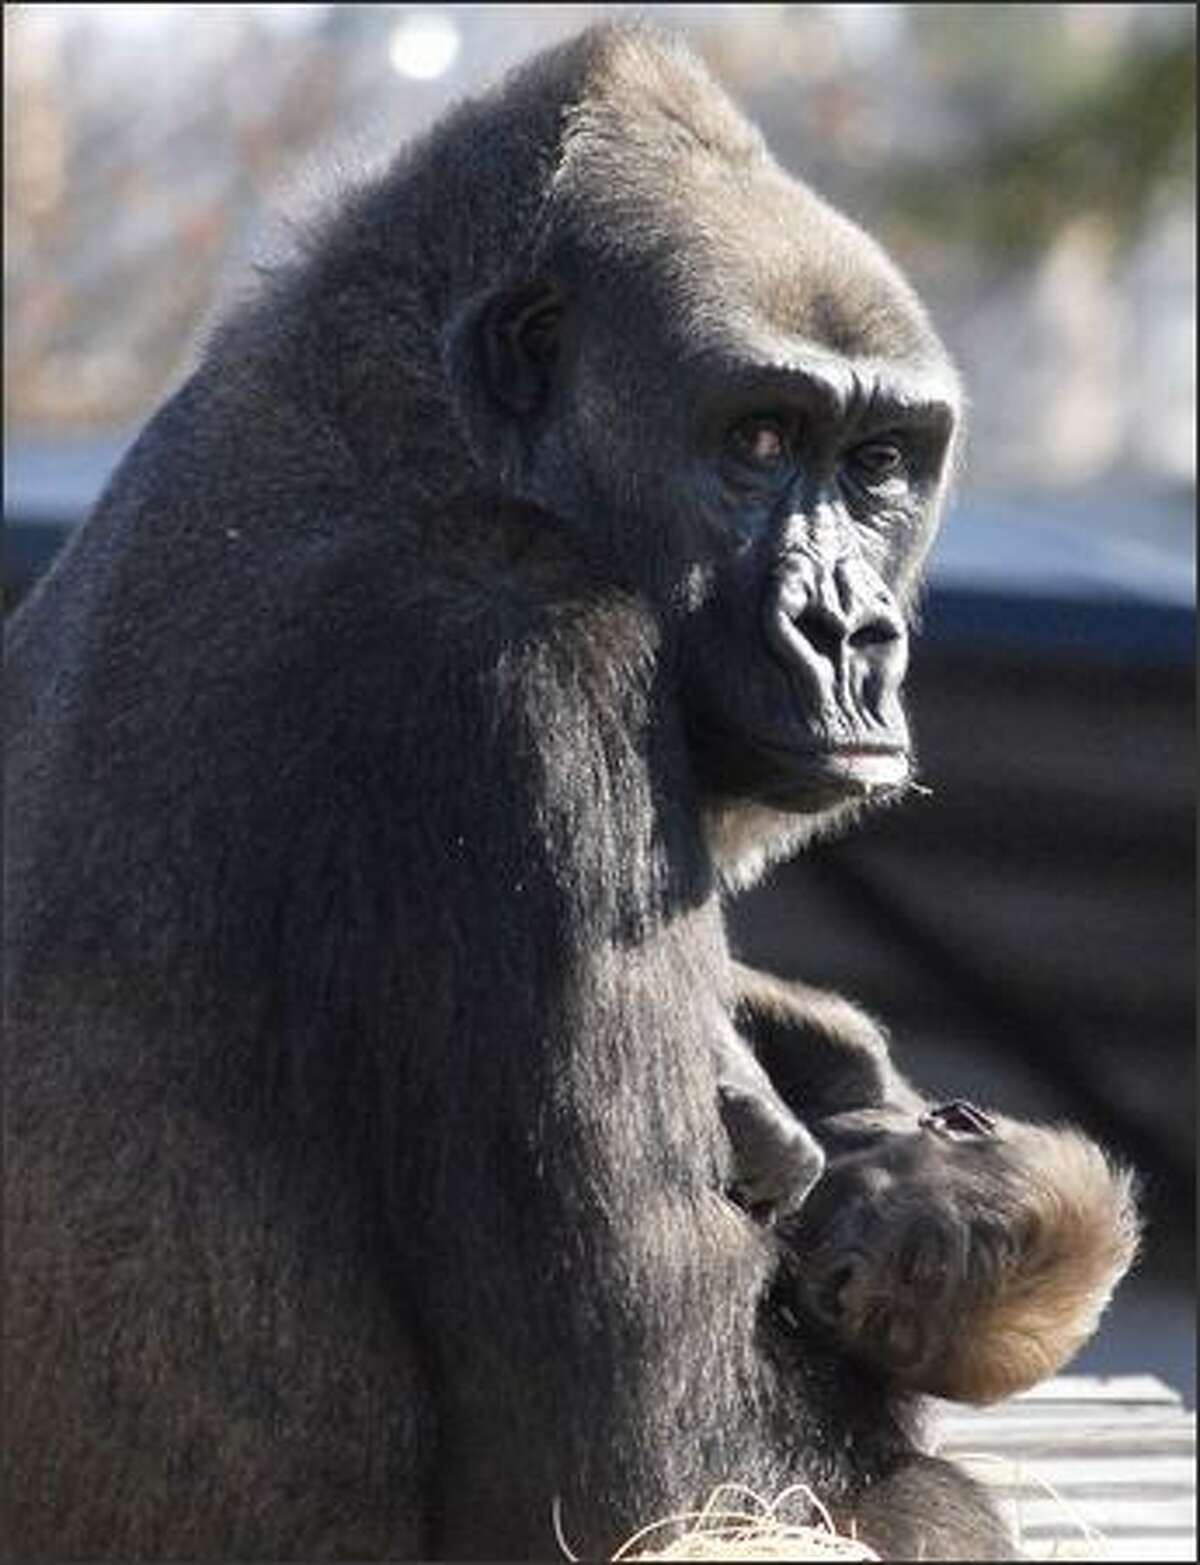 Sekani, a 16-year-old Western Lowland gorilla, holds her newborn at the Little Rock Zoo. The baby gorilla, who does not have a name yet, was shown to the public Saturday for the first time since he was born Oct. 10. (AP Photo/Mike Wintroath)